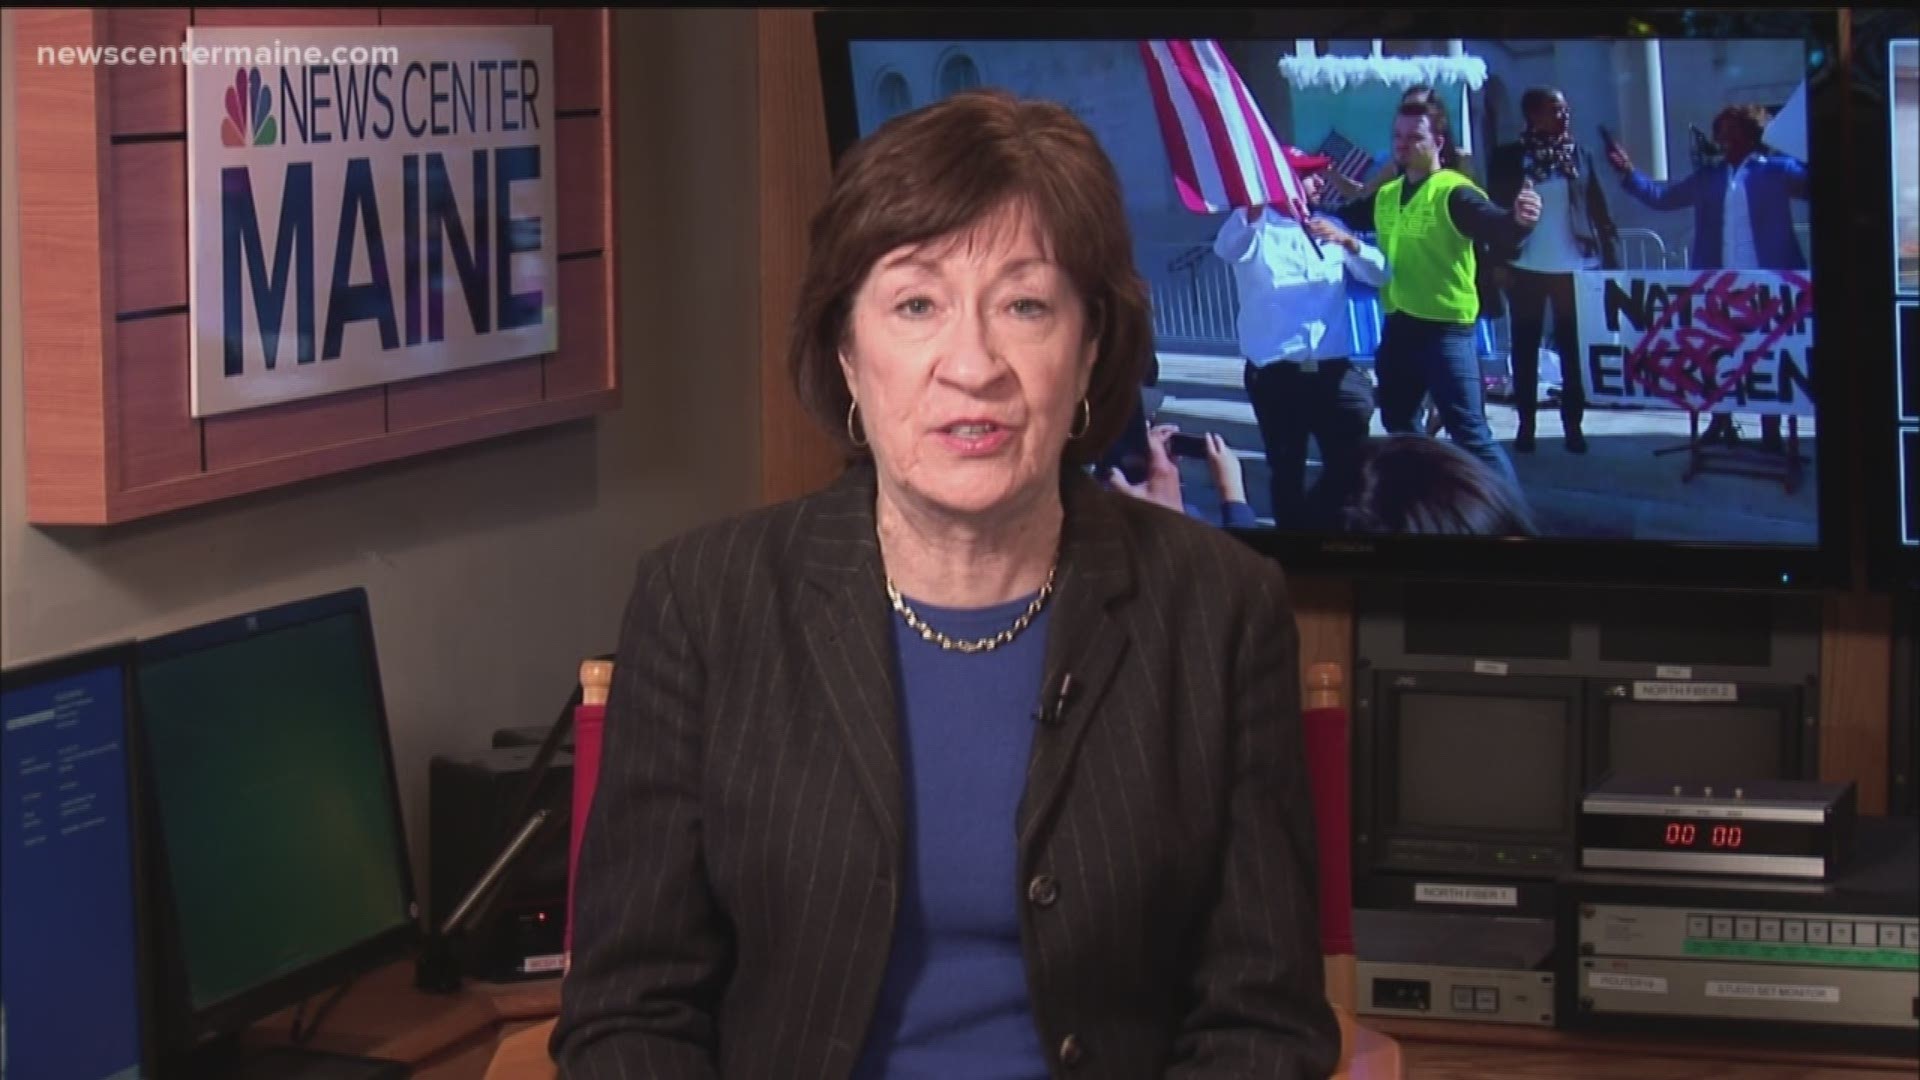 Collins reacts to Trump's national emergency declaration, subsequent lawsuit